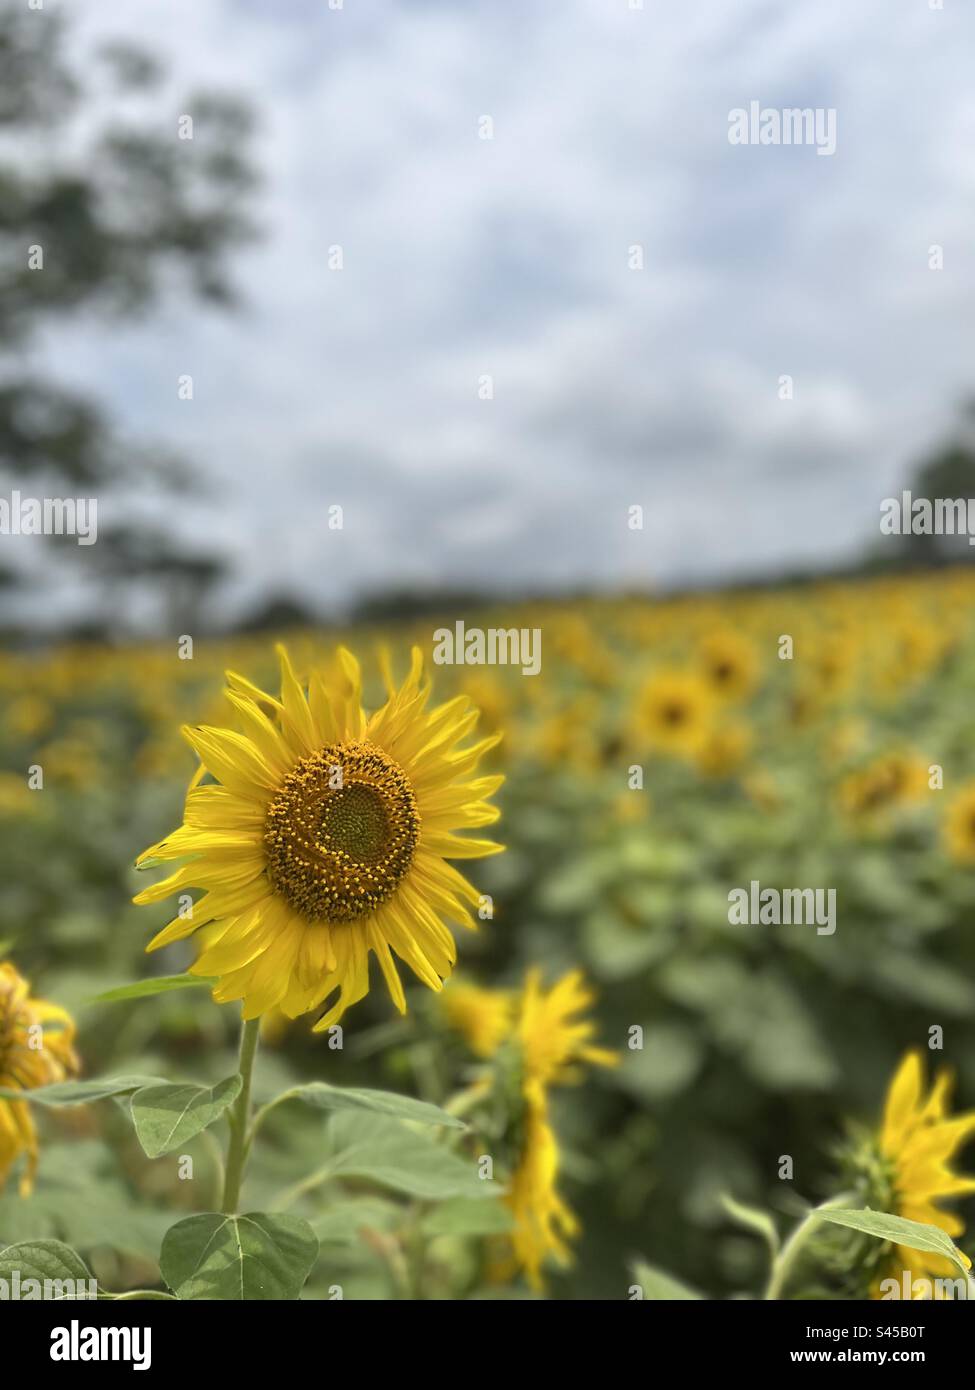 A sunflower standing out in the field of sunflowers. Makes a lovely wallpaper, shot on iPhone 13. Stock Photo